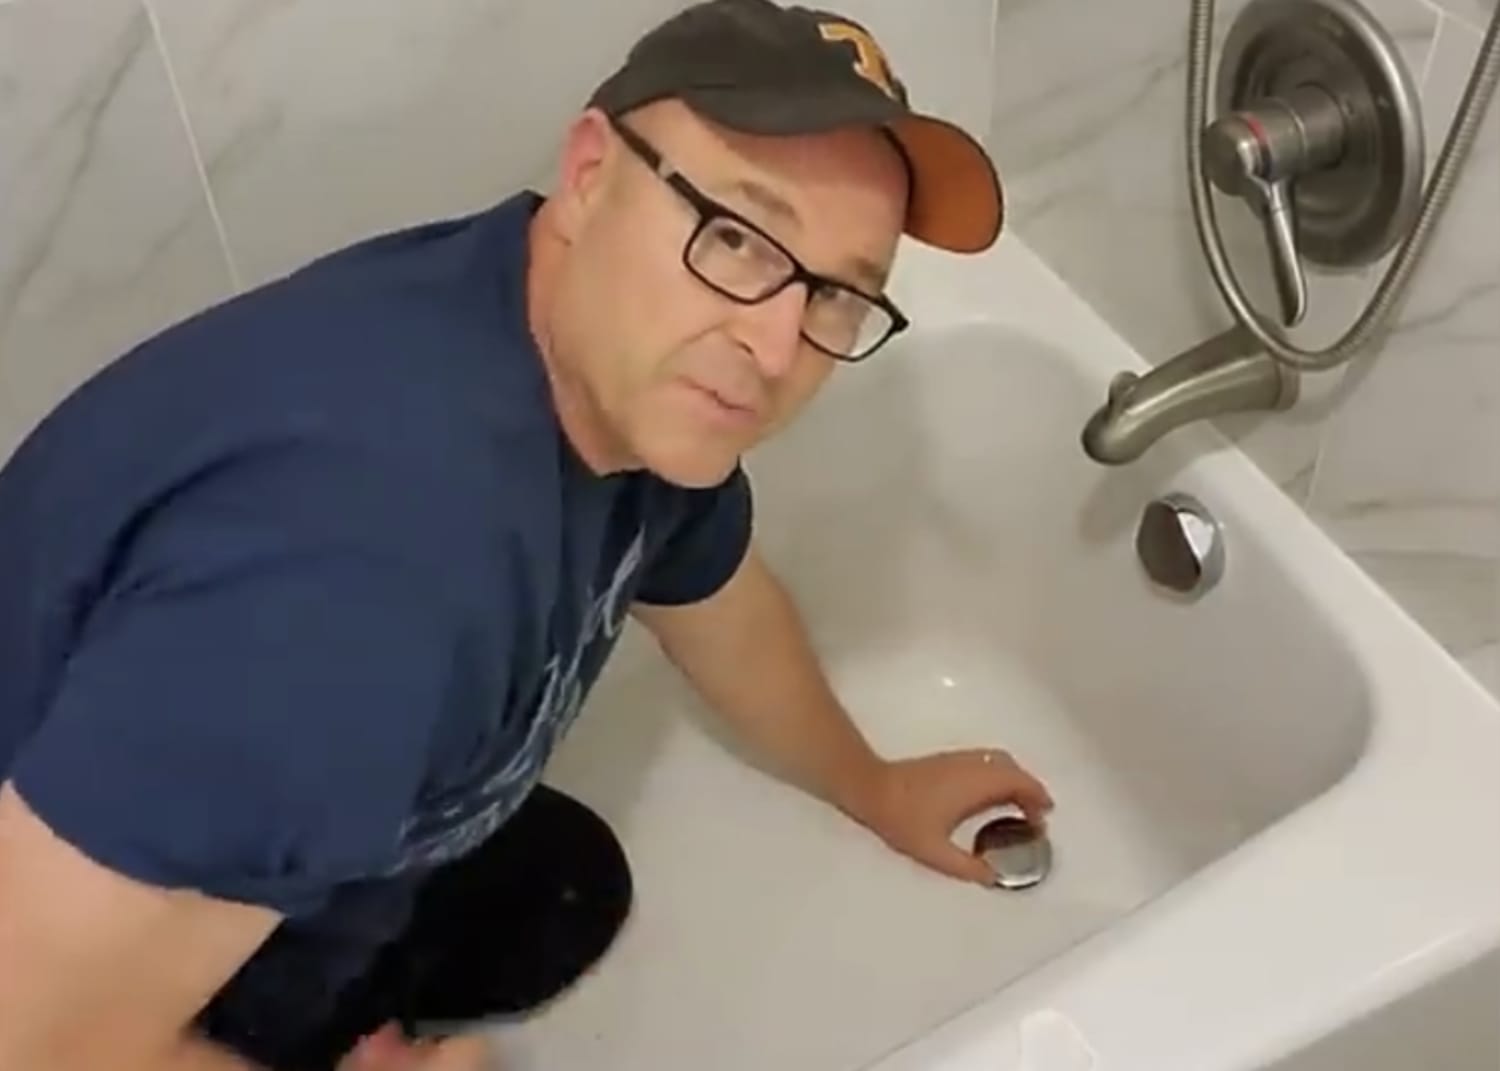 On YouTube, This Dad Offers Encouragement and Practical Tutorials for Household Tasks